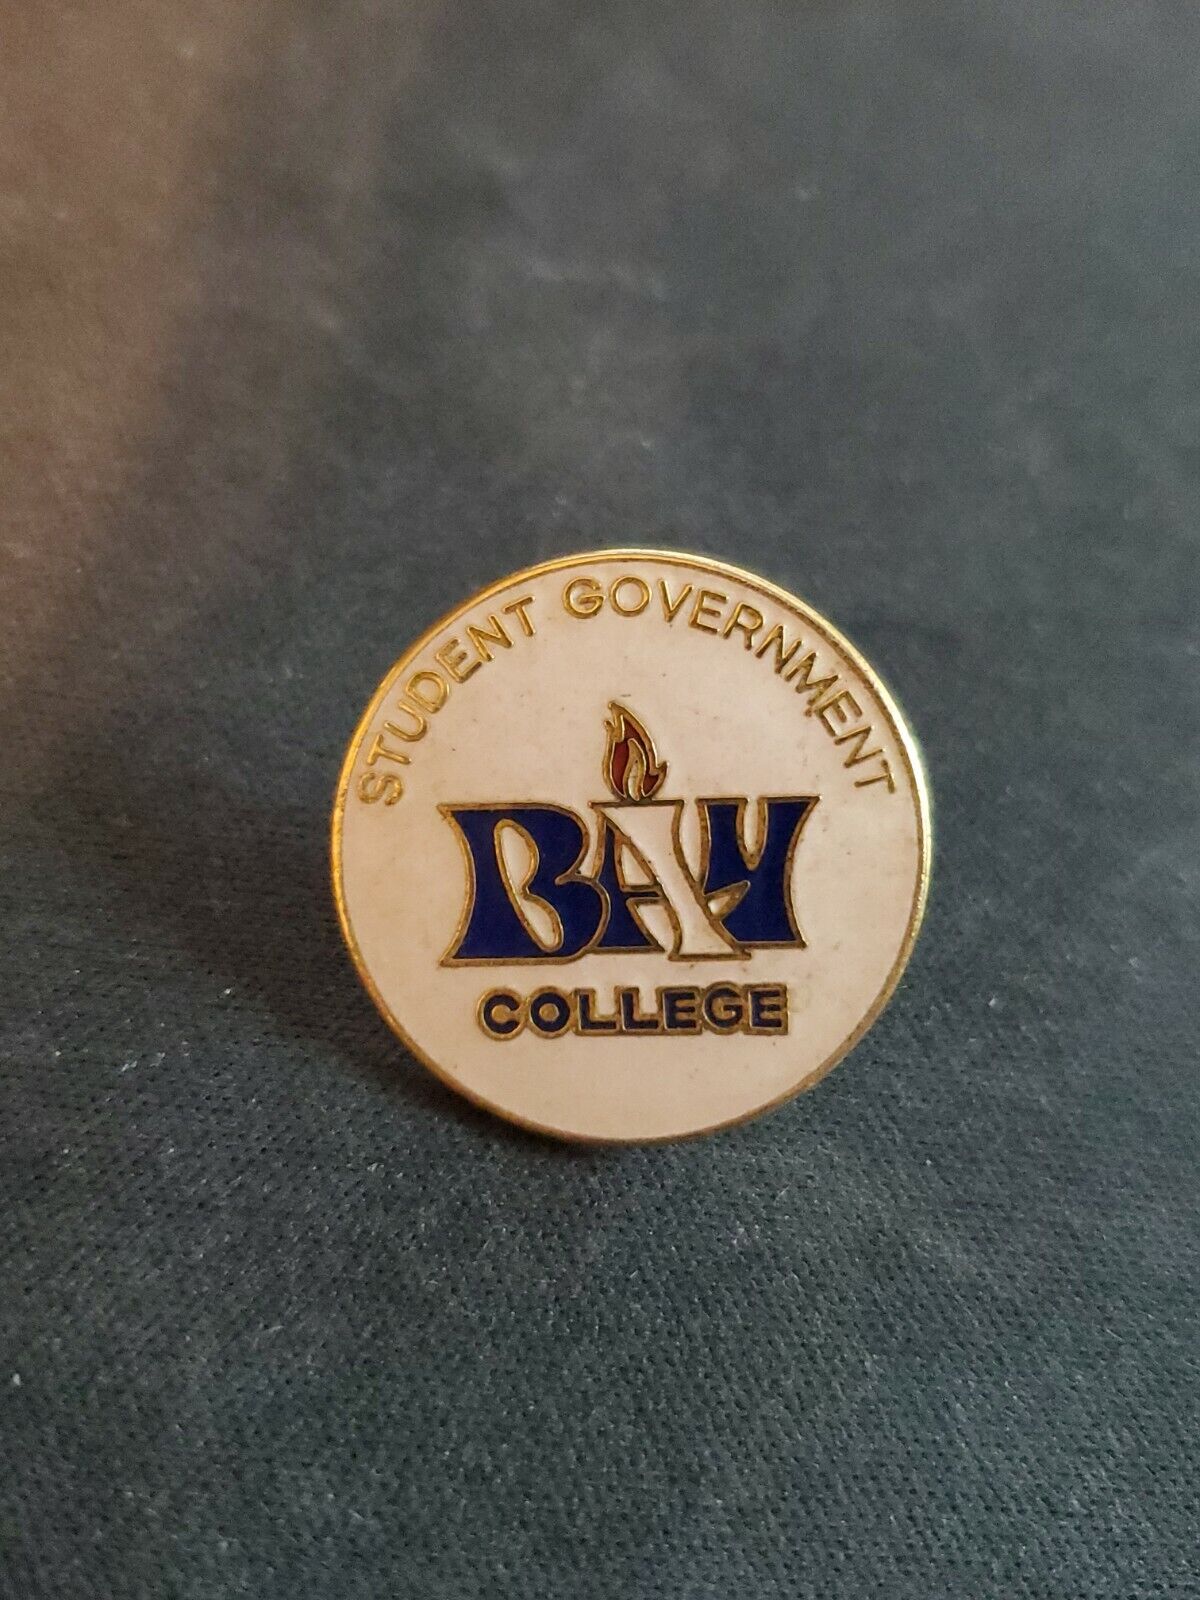 Student Government Bay College Pin vintage enamel AC